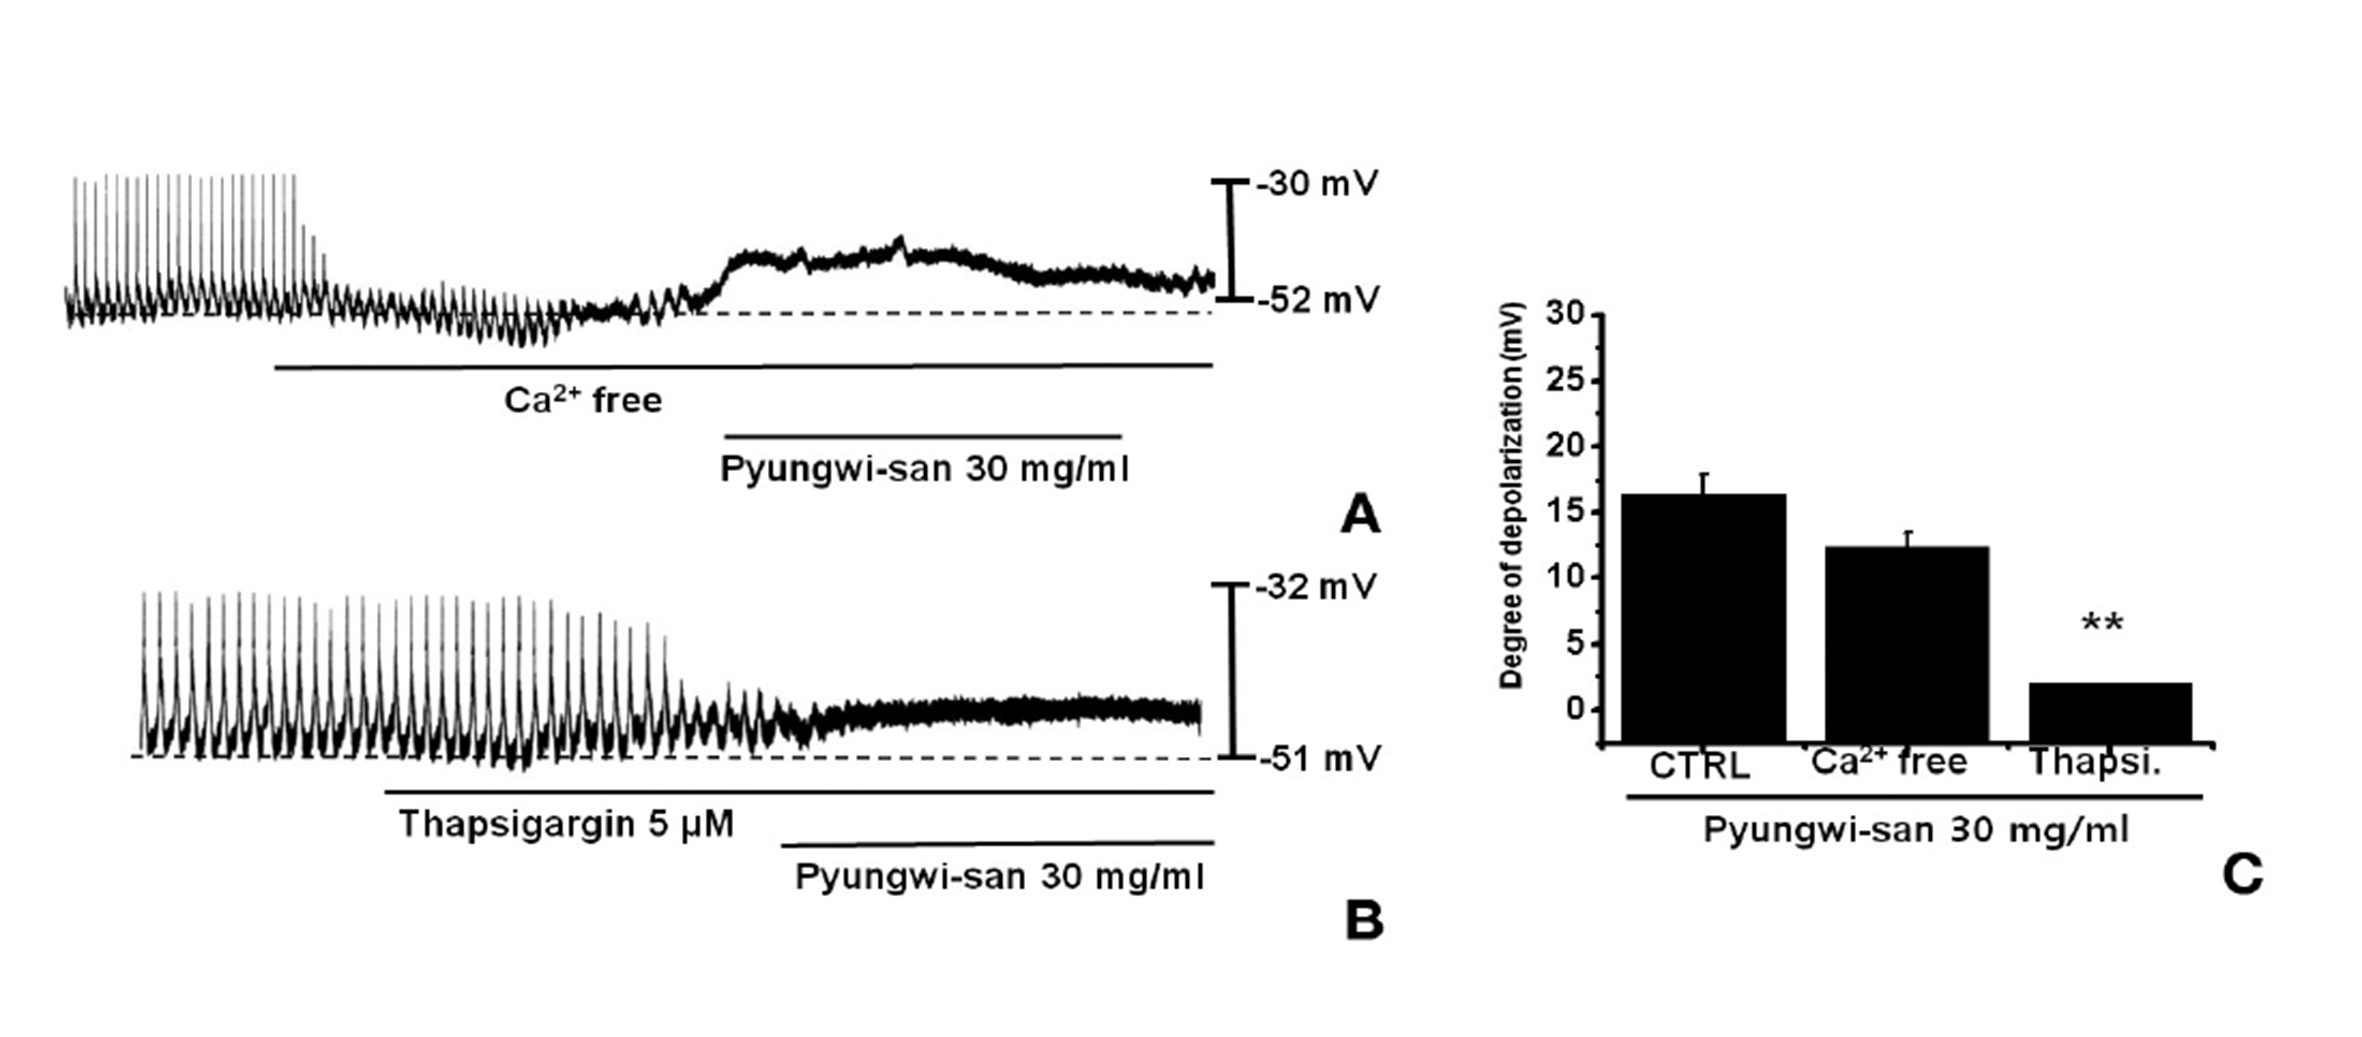 Effects of pretreatment with an external Ca2+-free solution or thapsigargin, a Ca2+-ATPase inhibitor, in the endoplasmic reticulum and of U-73122, an active phospholipase C inhibitor, on PWS-induced pacemaker potentials in cultured ICCs. A: ICCs were isolated from the Balb/c small intestine after primary cell culture for various doses of PSW (5 to 50 mg/mL) and the clamping mode (I = 0). The external Ca2+-free solution eliminated the generation of pacemaker potentials. Under these conditions, PWS-induced (30 mg/ml) membrane depolarizations were produced. B: Thapsigargin (5 ㎛) eliminated the generation of pacemaker potentials. Thapsigargin blocked the PWSinduced (30 mg/ml) membrane depolarizations. C: Summary of the responses to PWS in the presence of an external Ca2+-free solution and thapsigargin. Bars represent the mean values ± SE. **(P < 0.01) Significantly different from the untreated control. CTRL: Control.